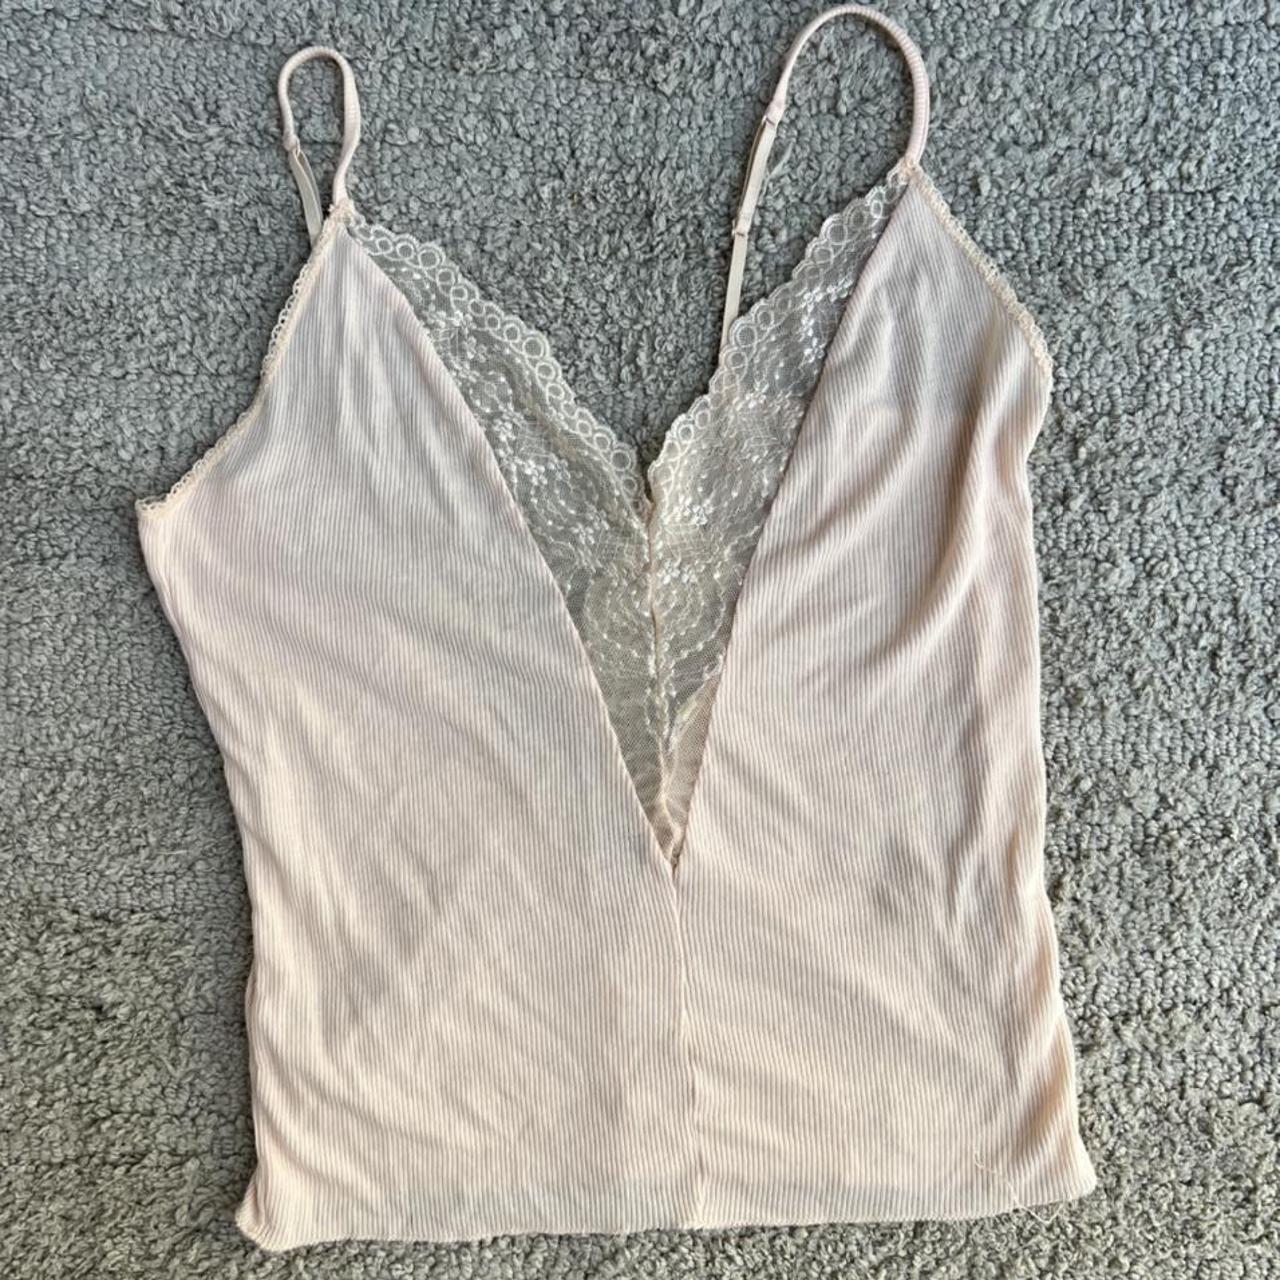 Out from Under Lace Lingerie Tank with adjustable... - Depop